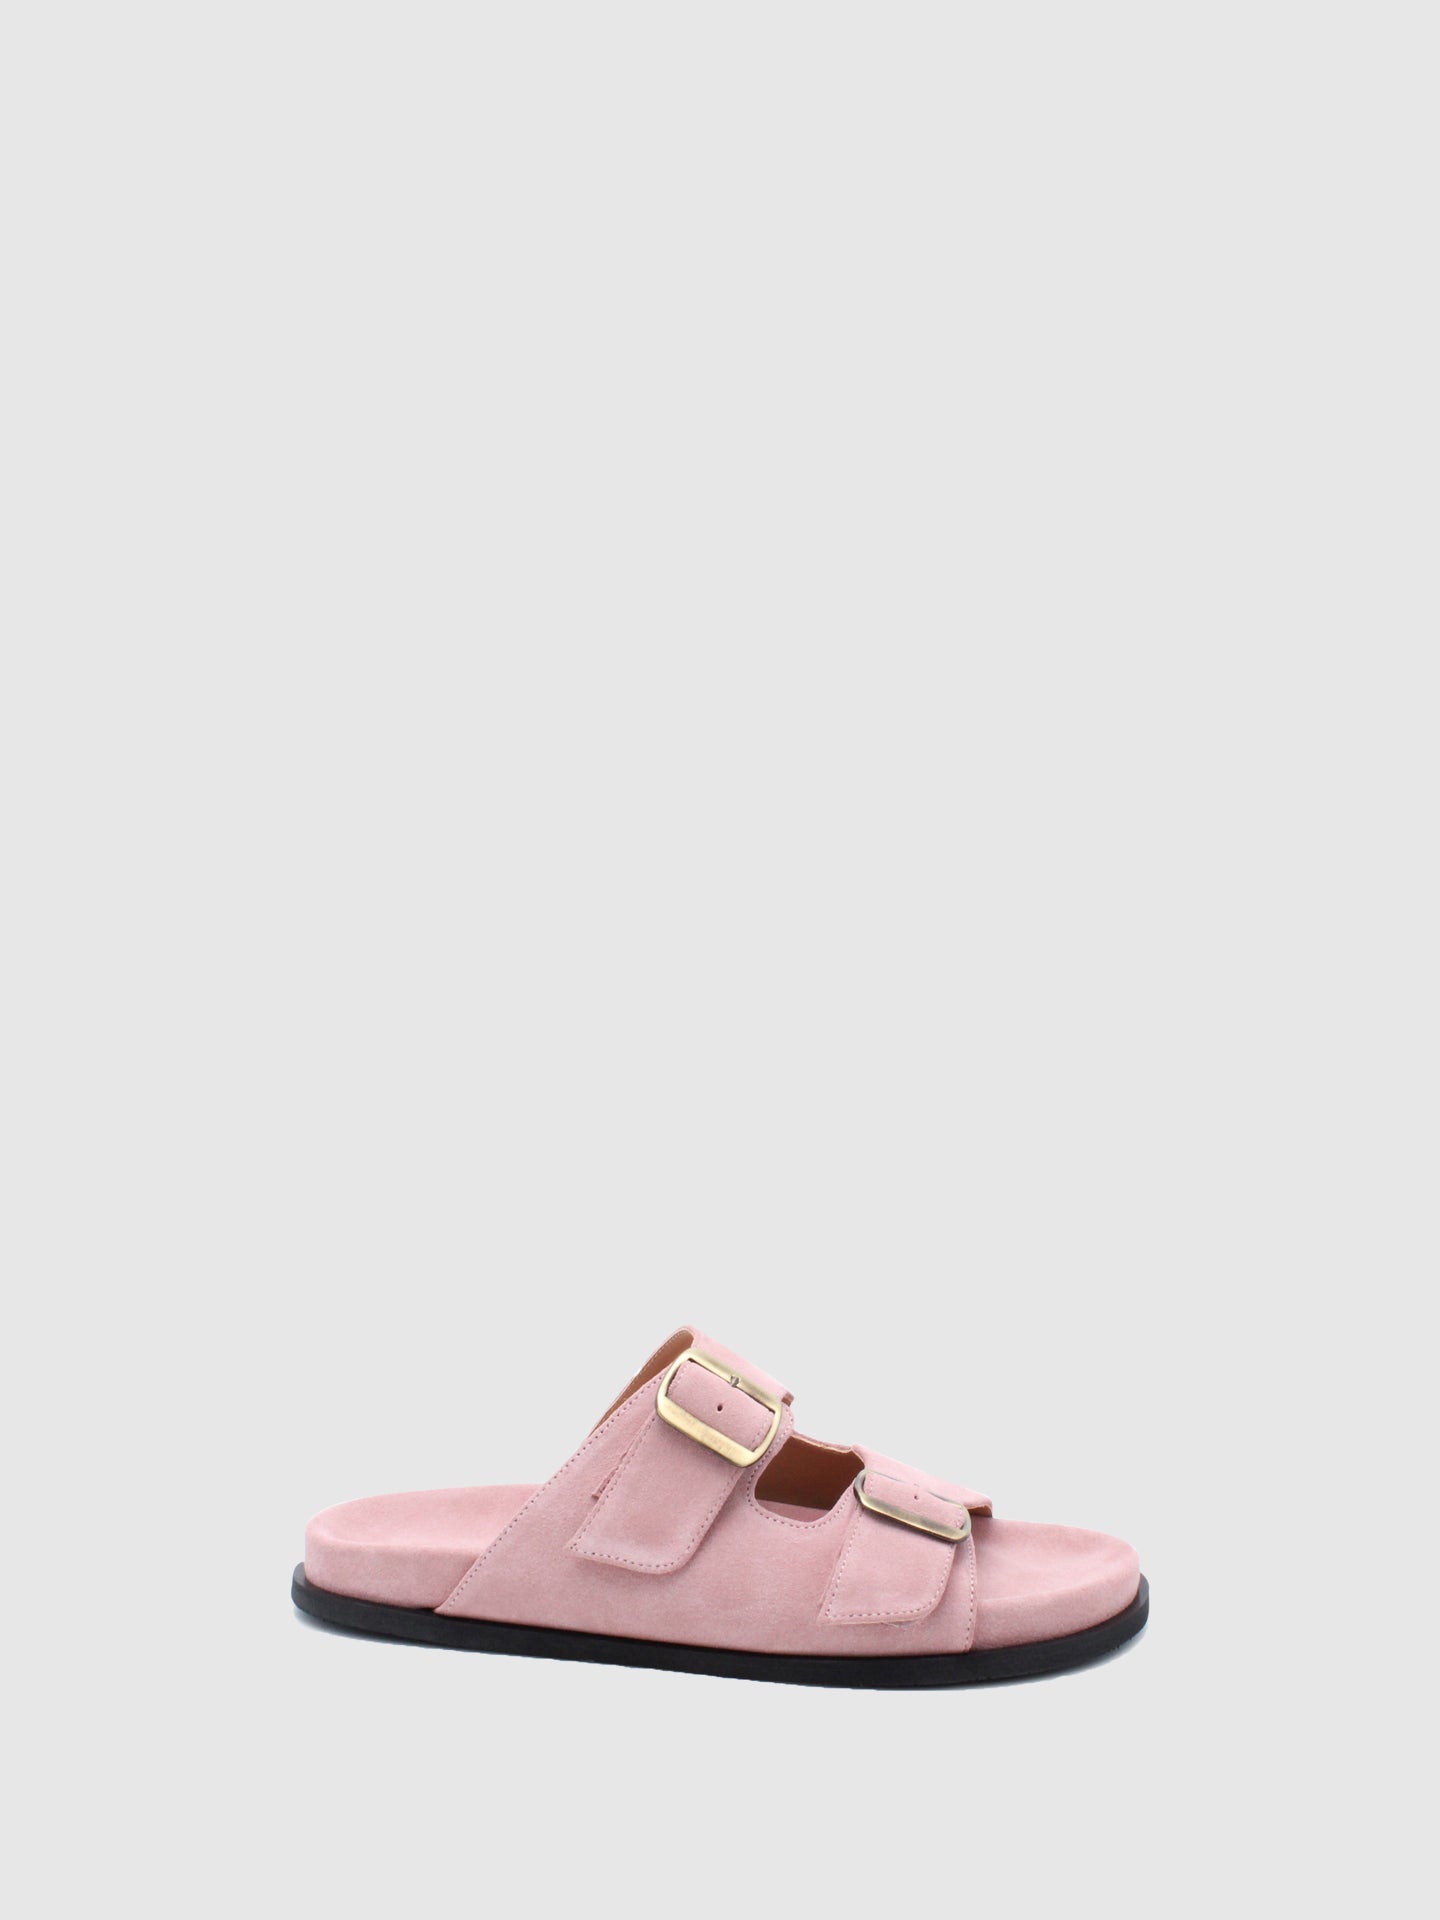 JJ Heitor Buckle Mules Impact Pink